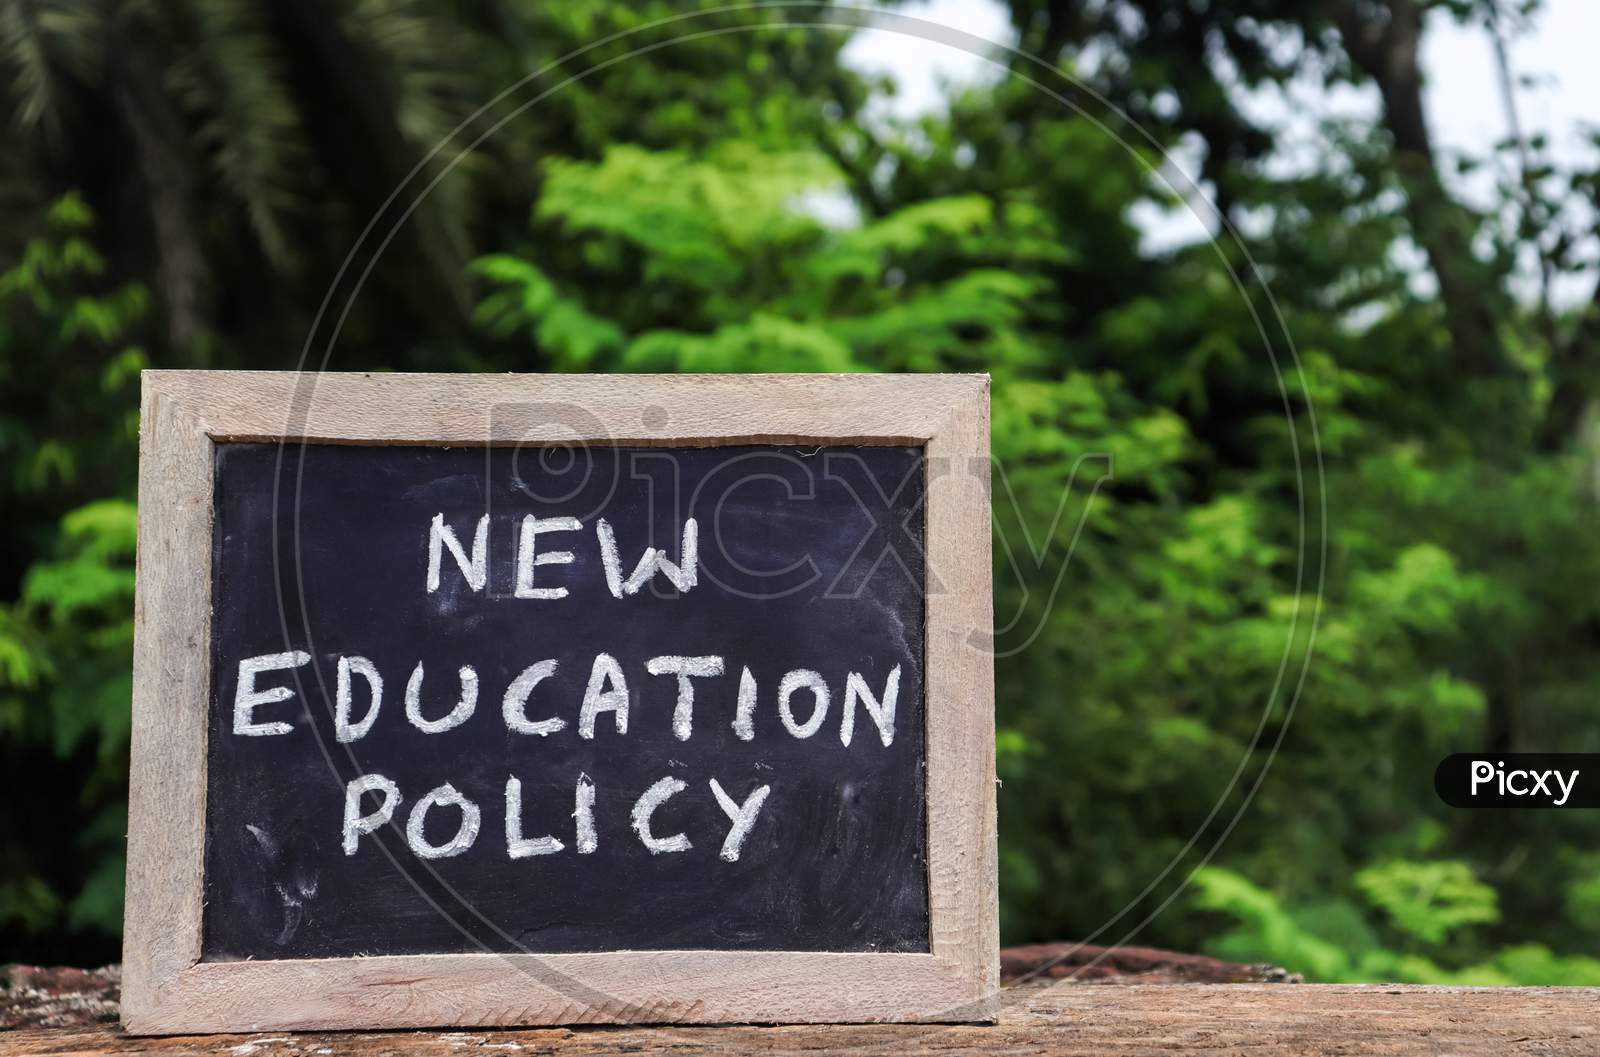 New Education Policy Written On Chalkboard With White Chalk